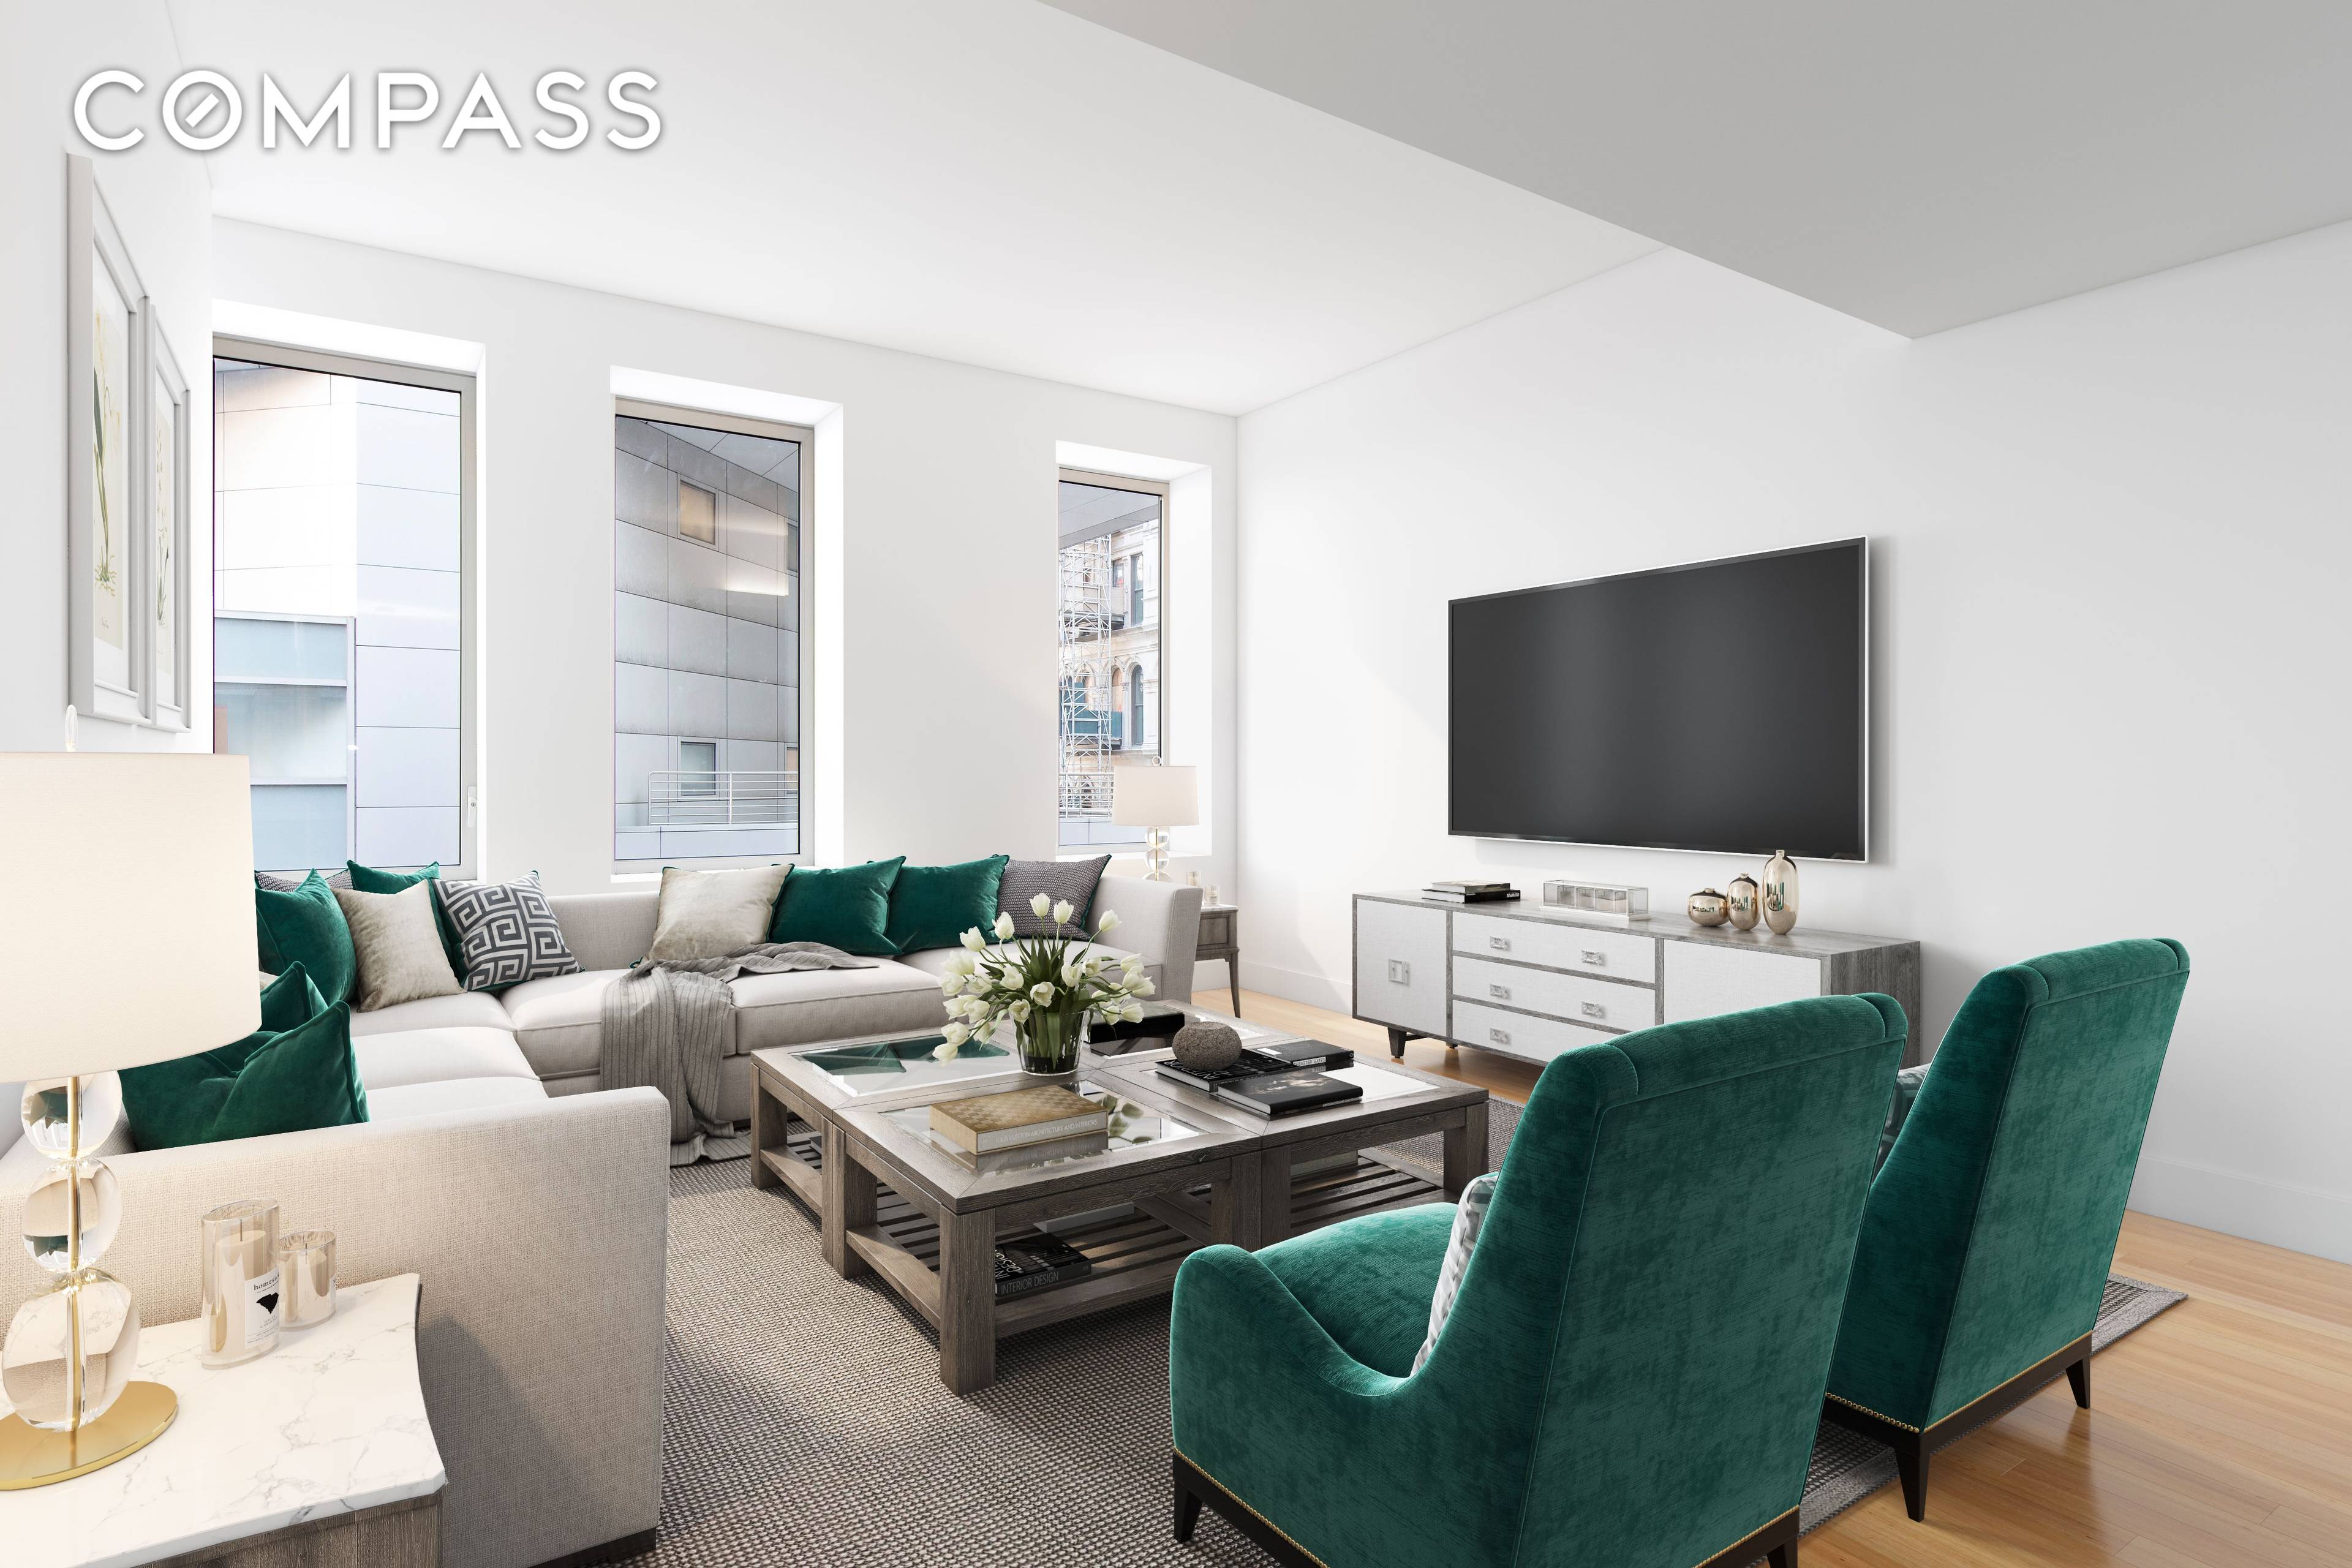 Located in the heart of Tribeca is a sophisticated 2 bedroom 2 bathroom that epitomizes artful design in a transcendent prewar neo classical style building, reinvented in 2014 by famed ...